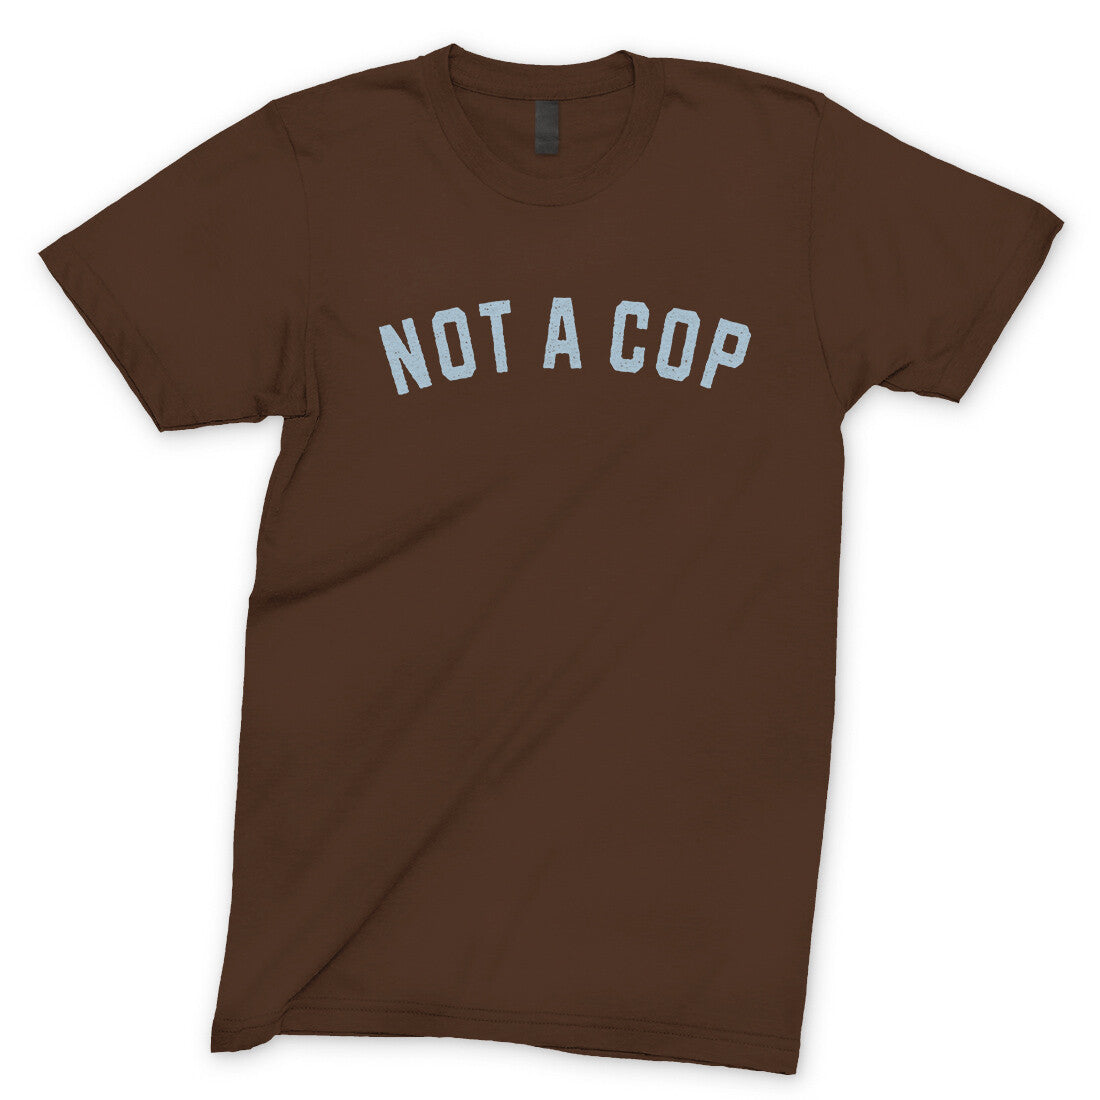 Not a Cop in Dark Chocolate Color